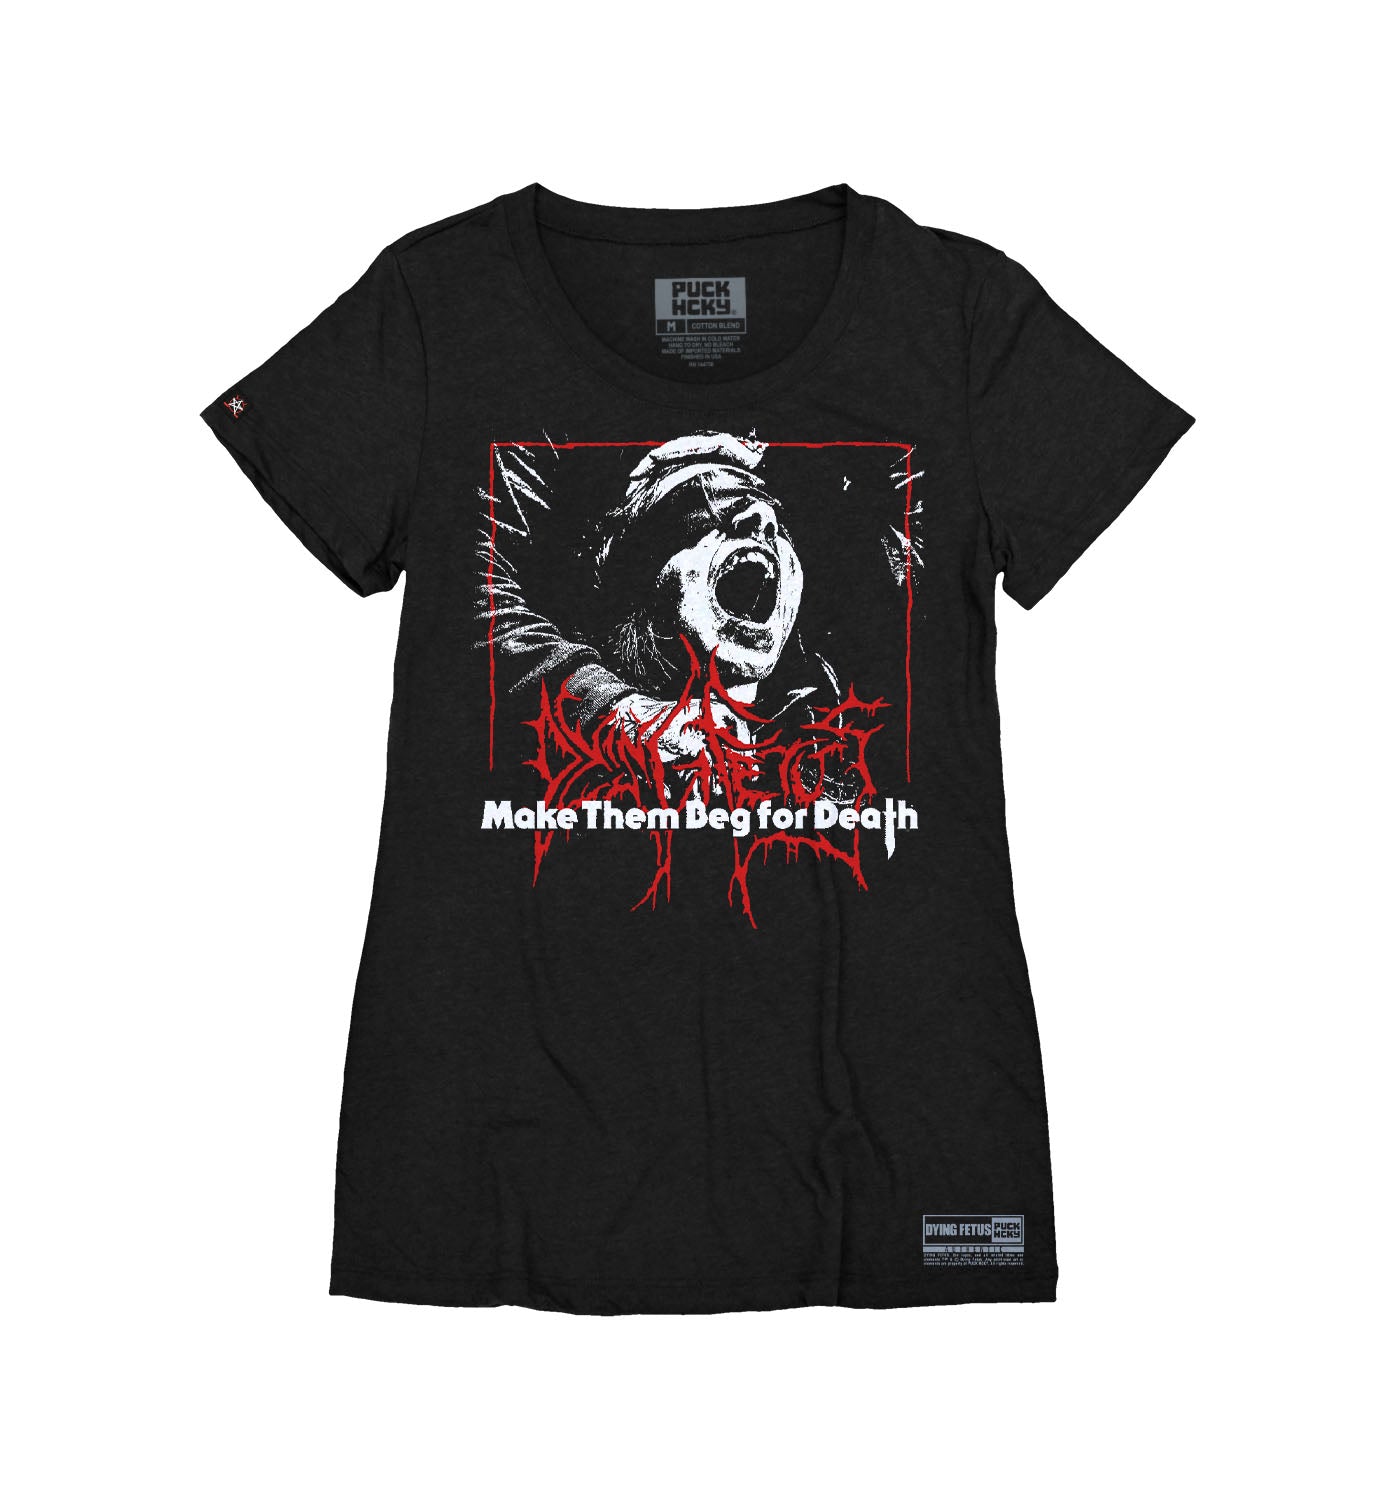 DYING FETUS 'MAKE THEM BEG' women's short sleeve hockey t-shirt in black front view